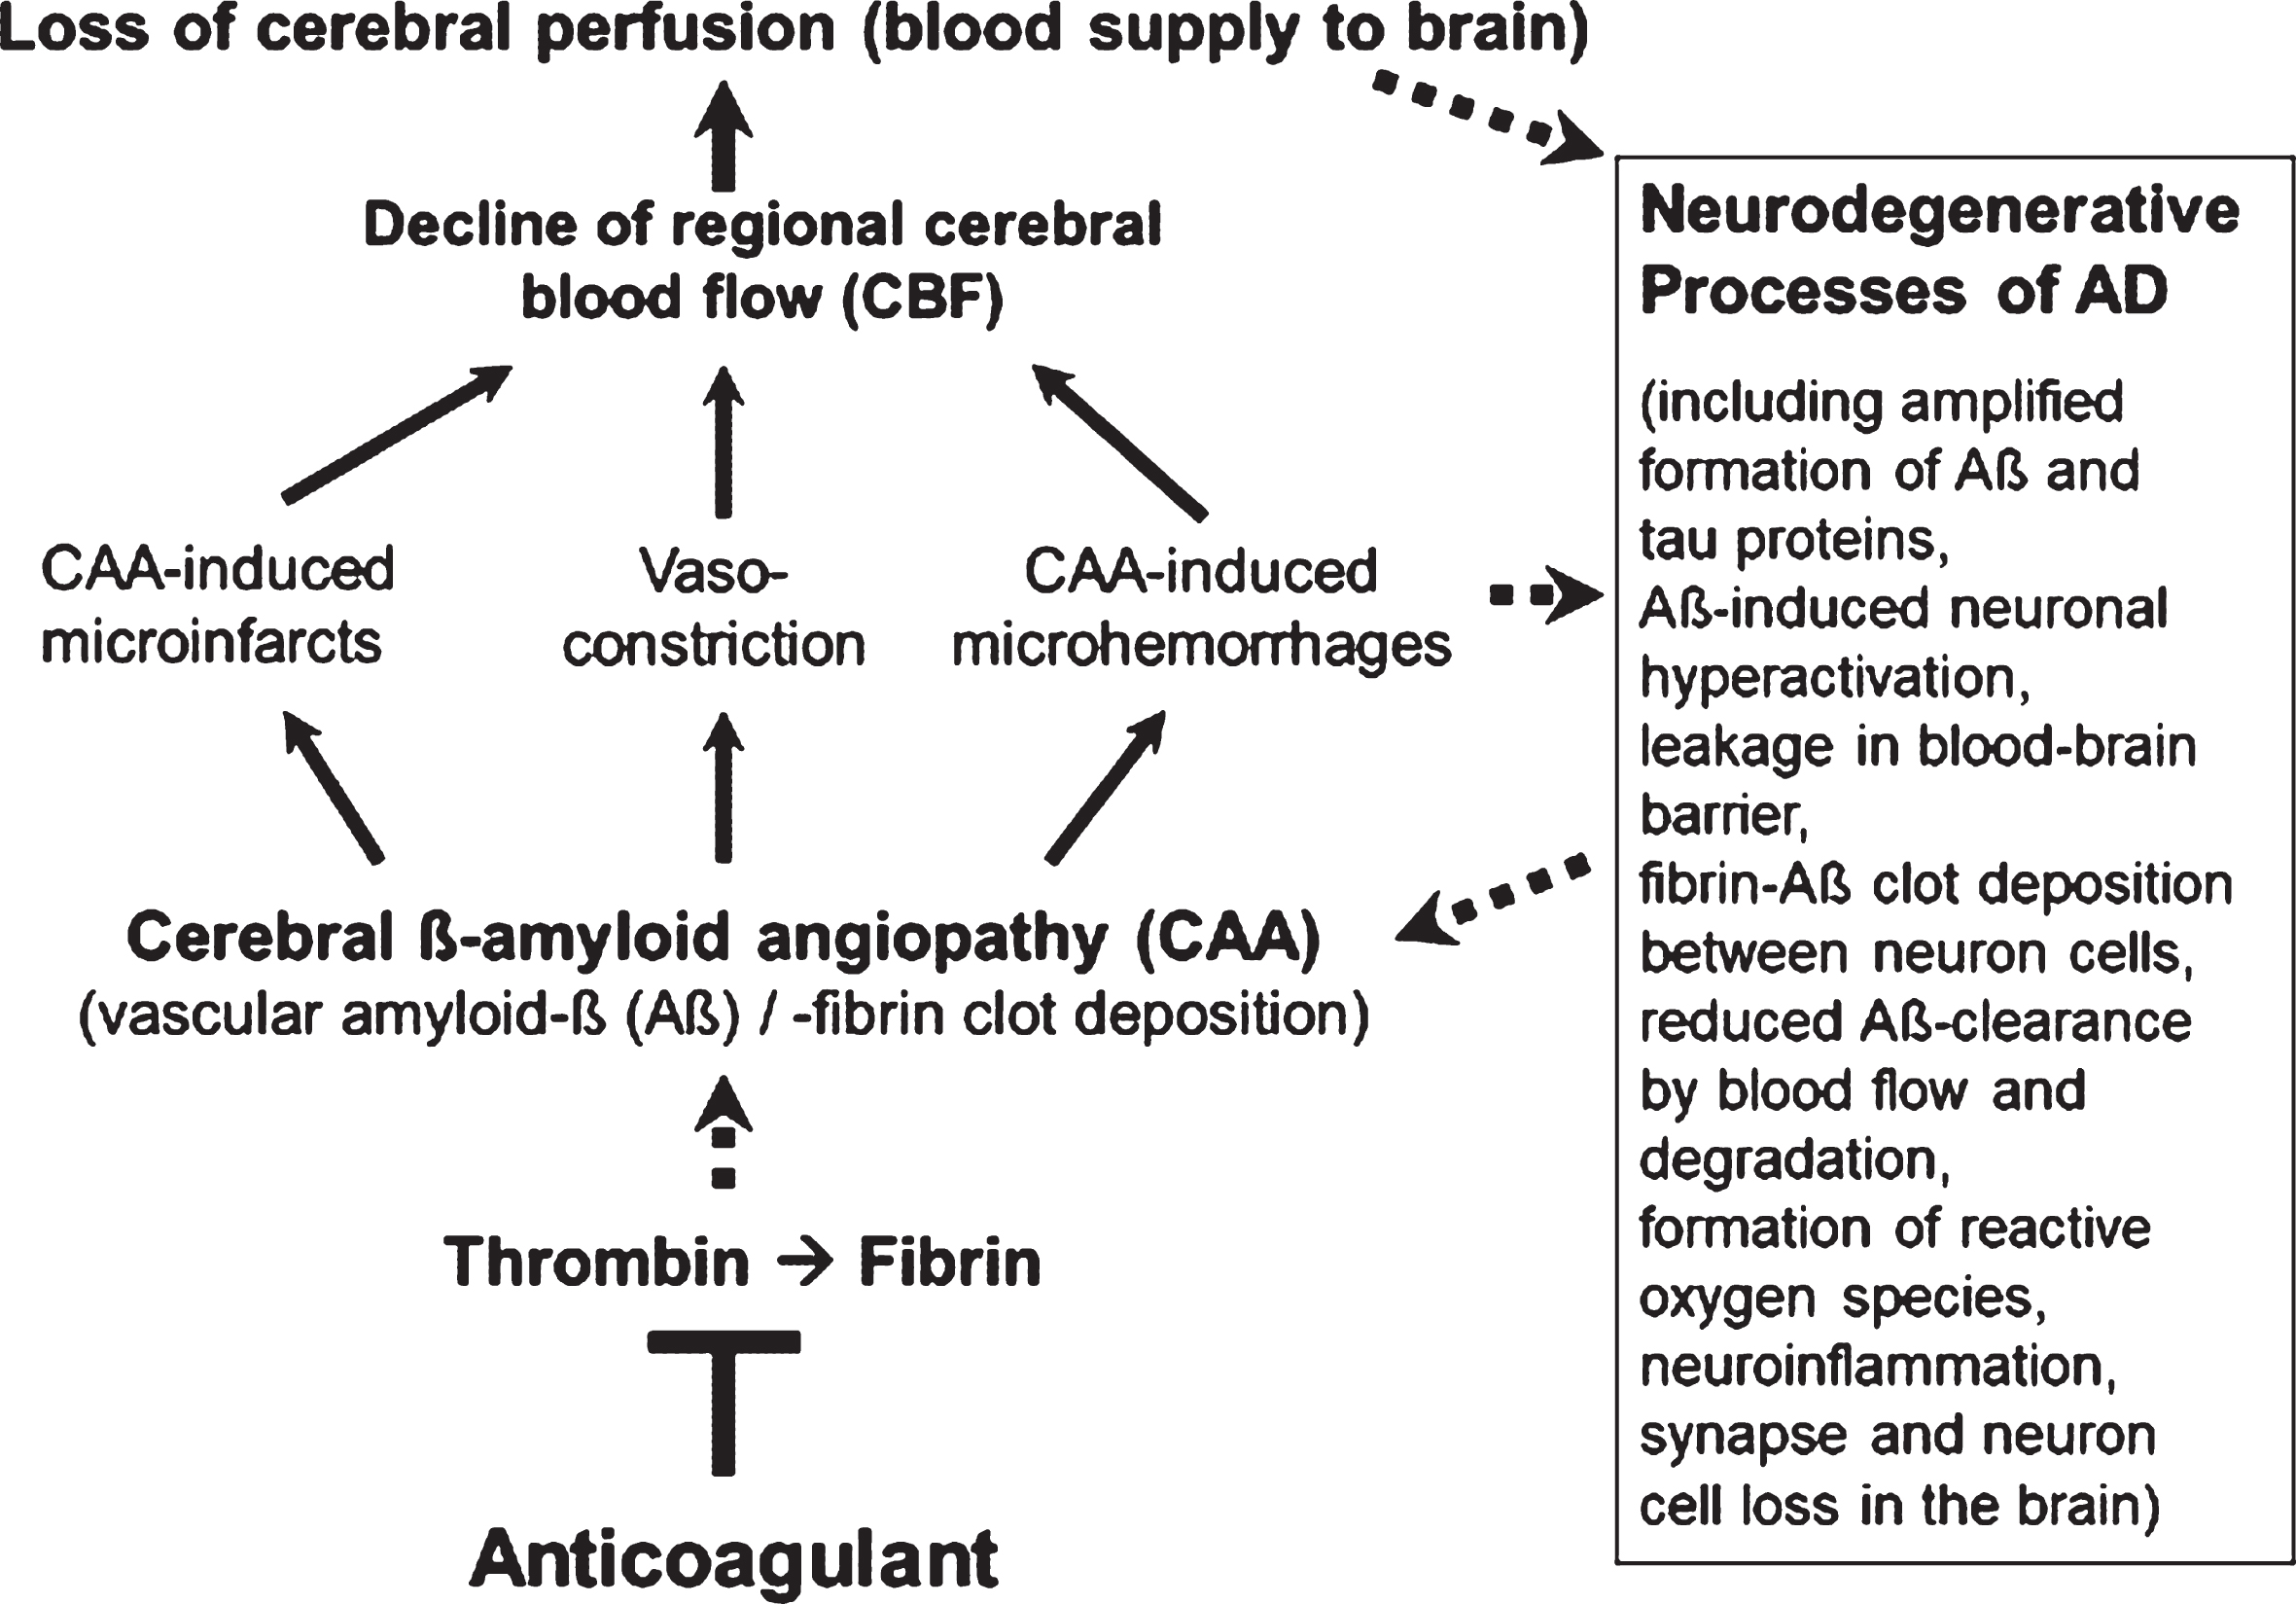 Vascular abnormalities, present in Alzheimer’s disease (AD), and proposed mechanism of action of direct oral anticoagulants (DOACs) for therapy. Typical of the early development of AD are pathological changes in the cerebral blood vessels, a condition, known as cerebral amyloid angiopathy (CAA). In the CAA, degradation-resistant fibrin clots containing amyloid-β-proteins (Aβ) deposit in and around cerebral blood vessels, leading to microvascular infarctions (occlusion), microhemorrhages and vasoconstriction of capillary vessels. Cerebral blood flow (CBF), mainly in neocortical and hippocampal areas, declines and brain perfusion and supply with oxygen and nutrients are lost. This amplifies neurodegenerative processes in the brain, exemplified by progressive Aβ and tau protein accumulation, reduced perivascular Aβ clearance, disruption of blood-brain barrier (BBB), neuroinflammation, and loss of synapses and neurons. In a kind of circulus vitiosus, vascular dysfunction and derived effects are steadily deteriorating. Anticoagulants inhibit thrombin and thus, the formation of fibrin at a central point of this process. Consequently, progressive fibrin-Aβ clot deposition in CAA and thrombin- and fibrin-induced inflammatory processes are blocked. Given full cerebral perfusion and reduced Aβ- and fibrin-accumulating and inflammatory milieu, it is proposed that anticoagulant treatment could be able to decrease vascular-driven progression in neurodegenerative and cognitive changes in AD. Indirect stimulatory effects are represented by dotted lines.